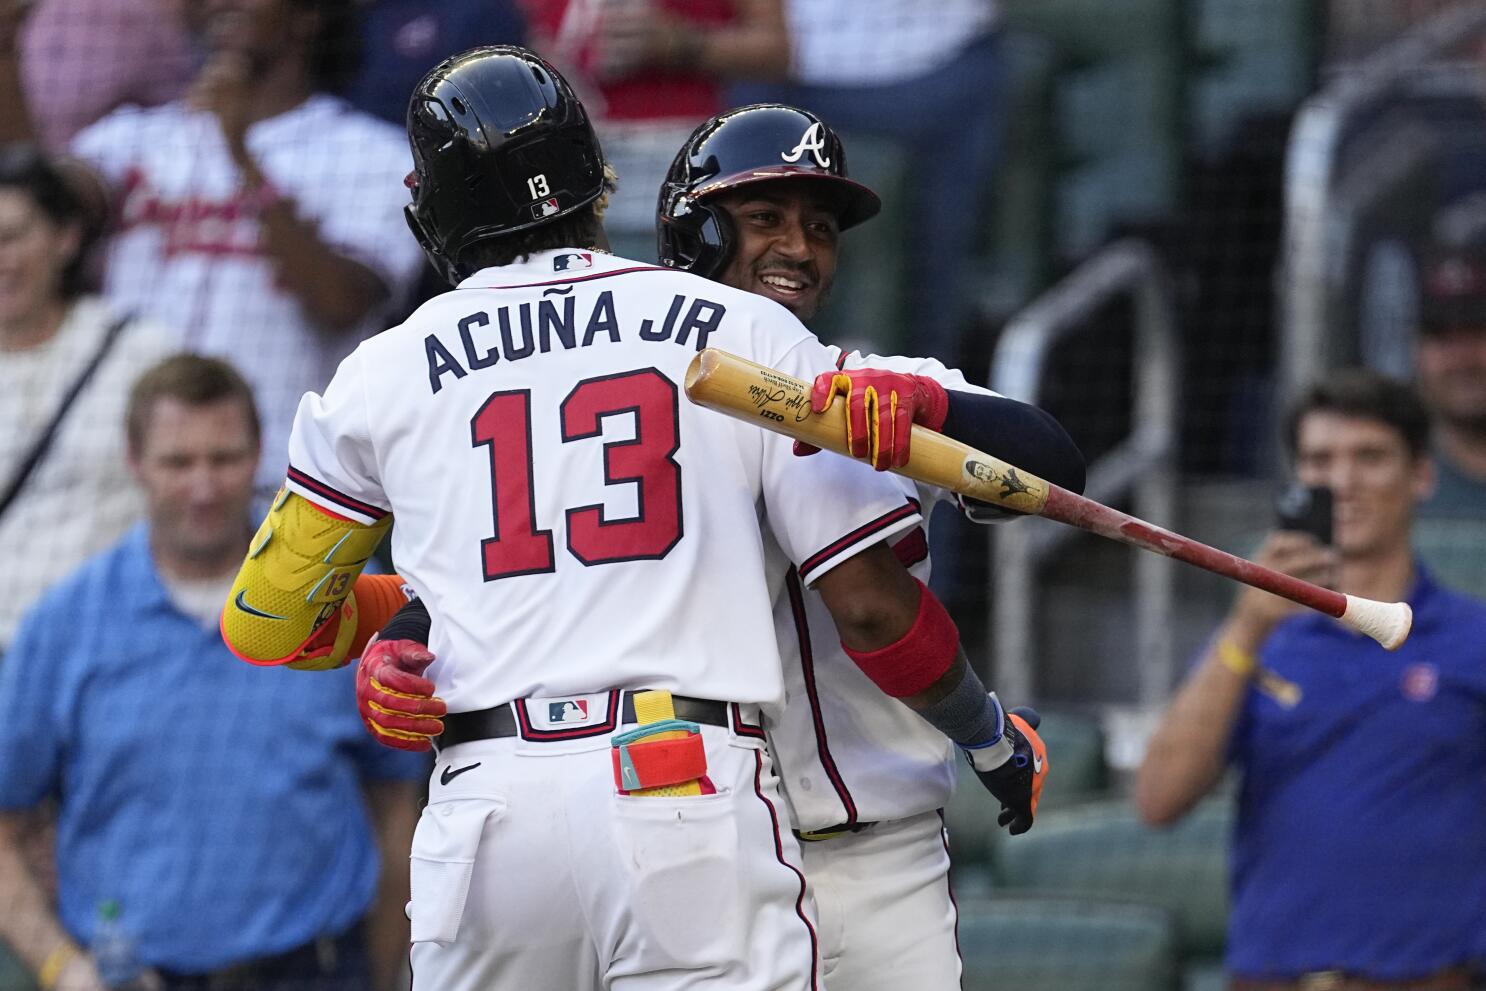 Acuña hits 2 HRs as power-hitting Braves keep rolling, beat Ryan, Twins 6-2  - The San Diego Union-Tribune